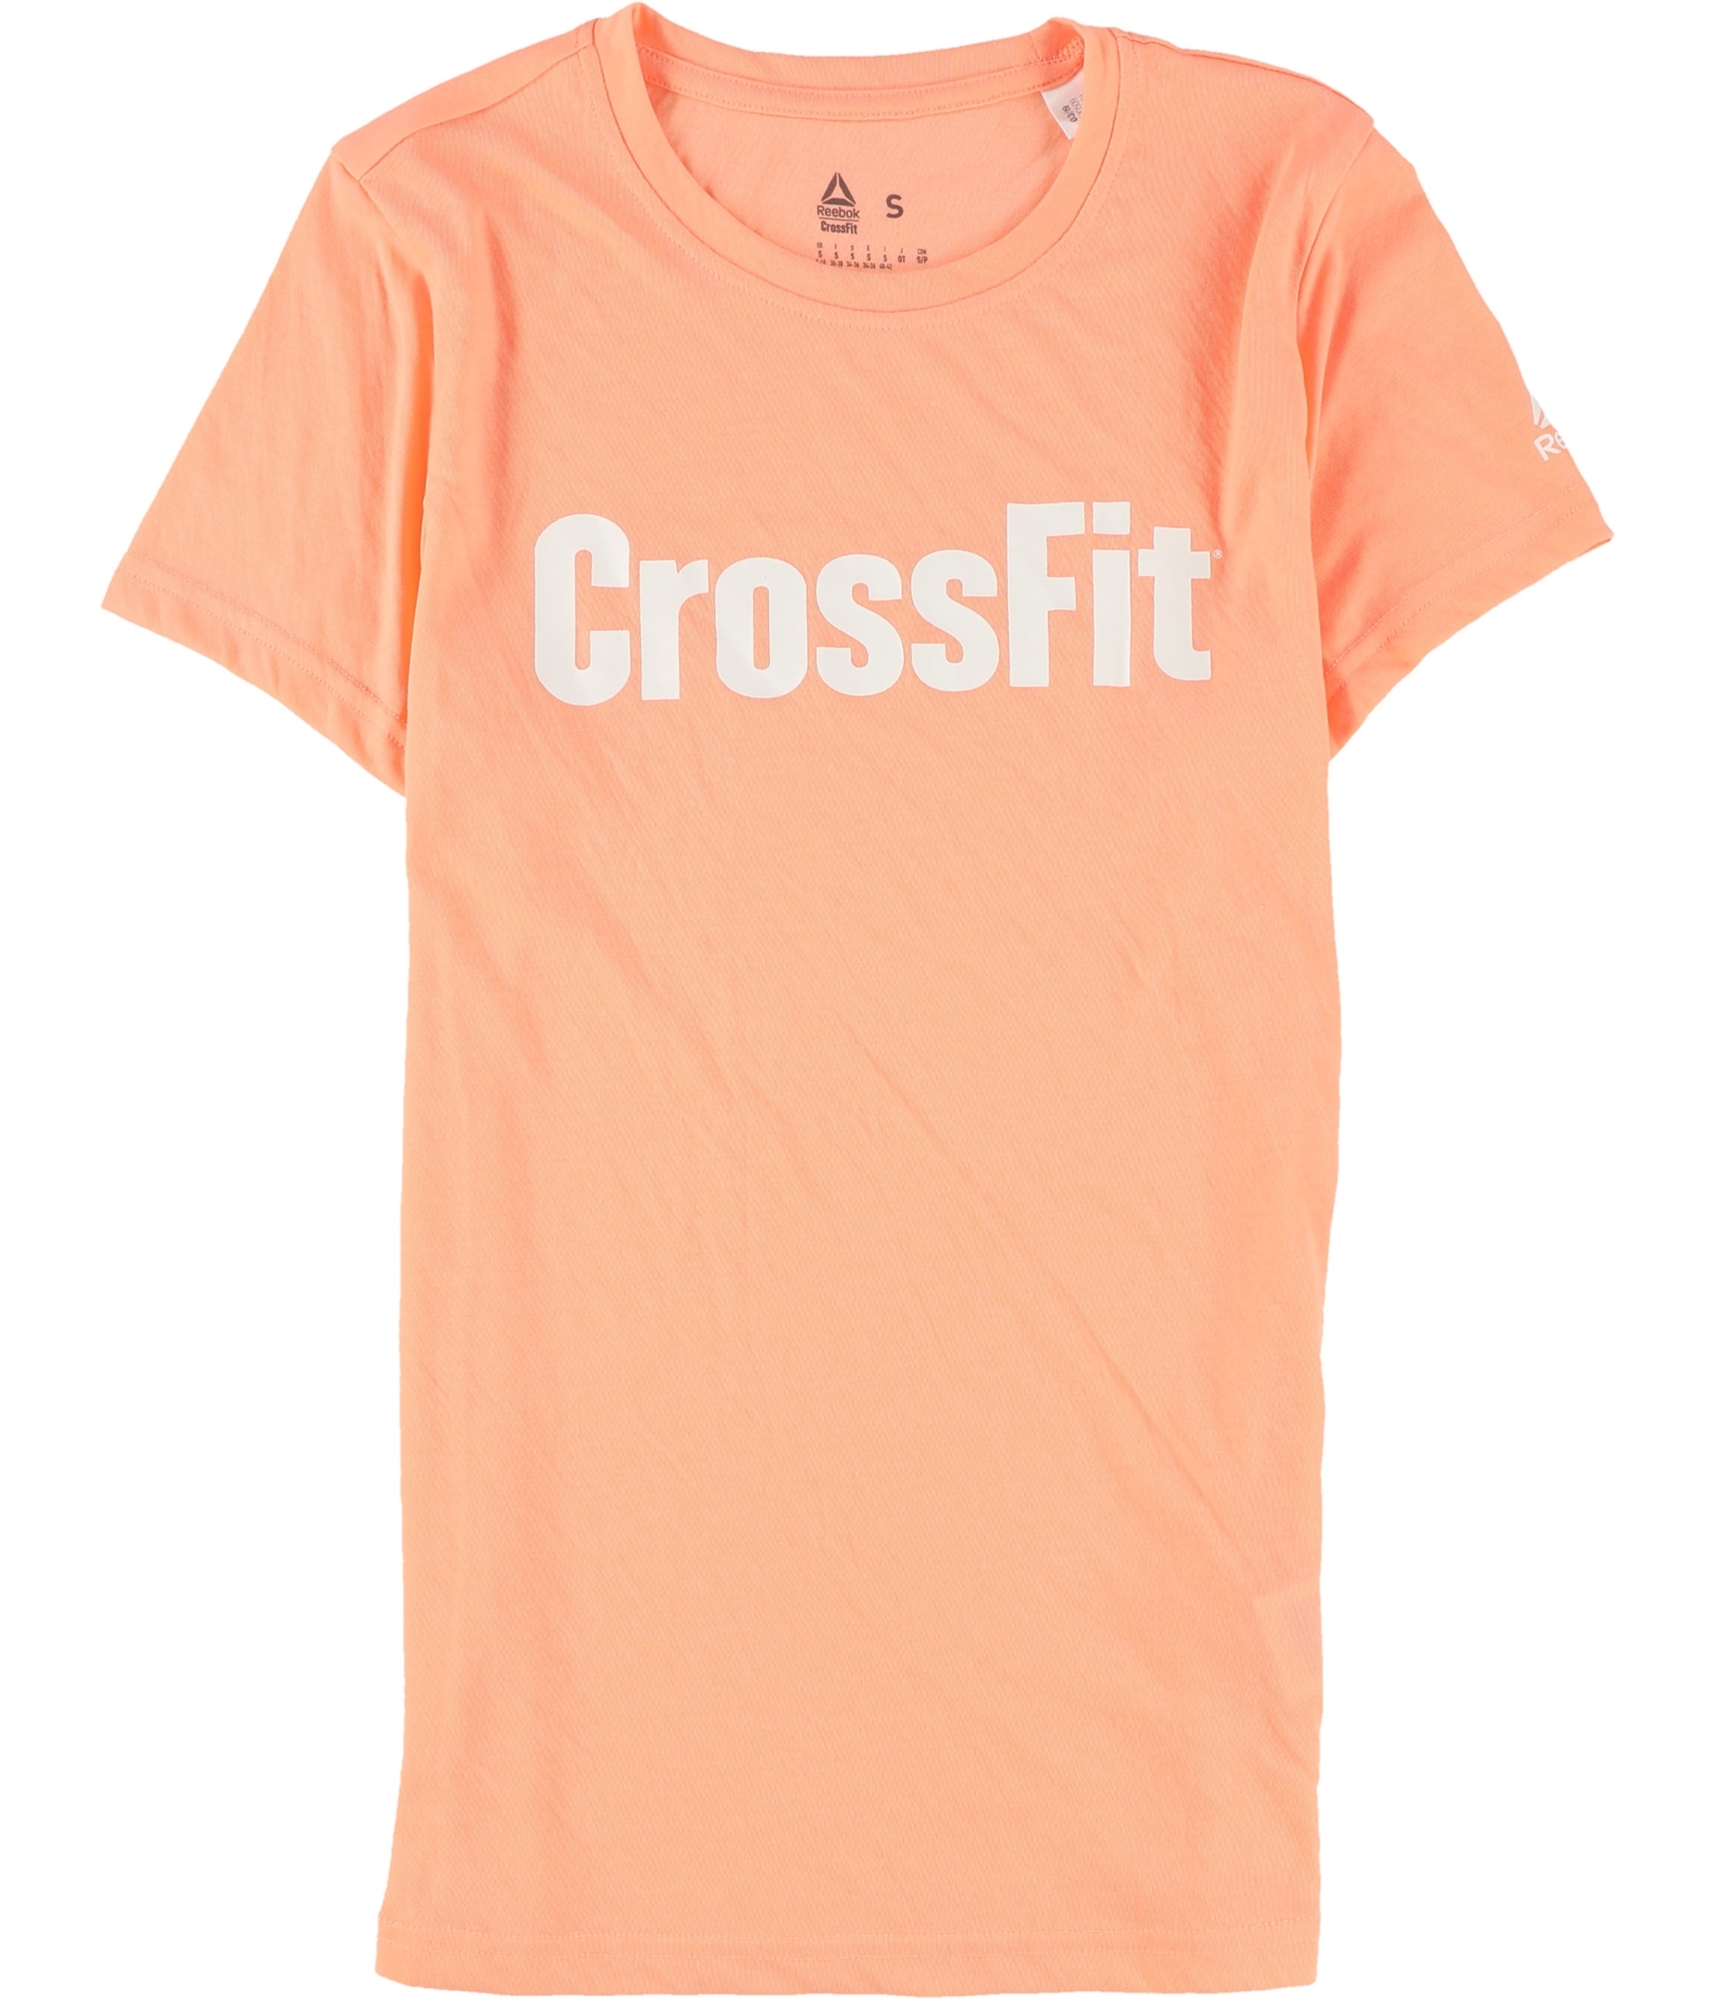 kapok virksomhed Variant Buy a Womens Reebok Crossfit Speedwick Graphic T-Shirt Online |  TagsWeekly.com